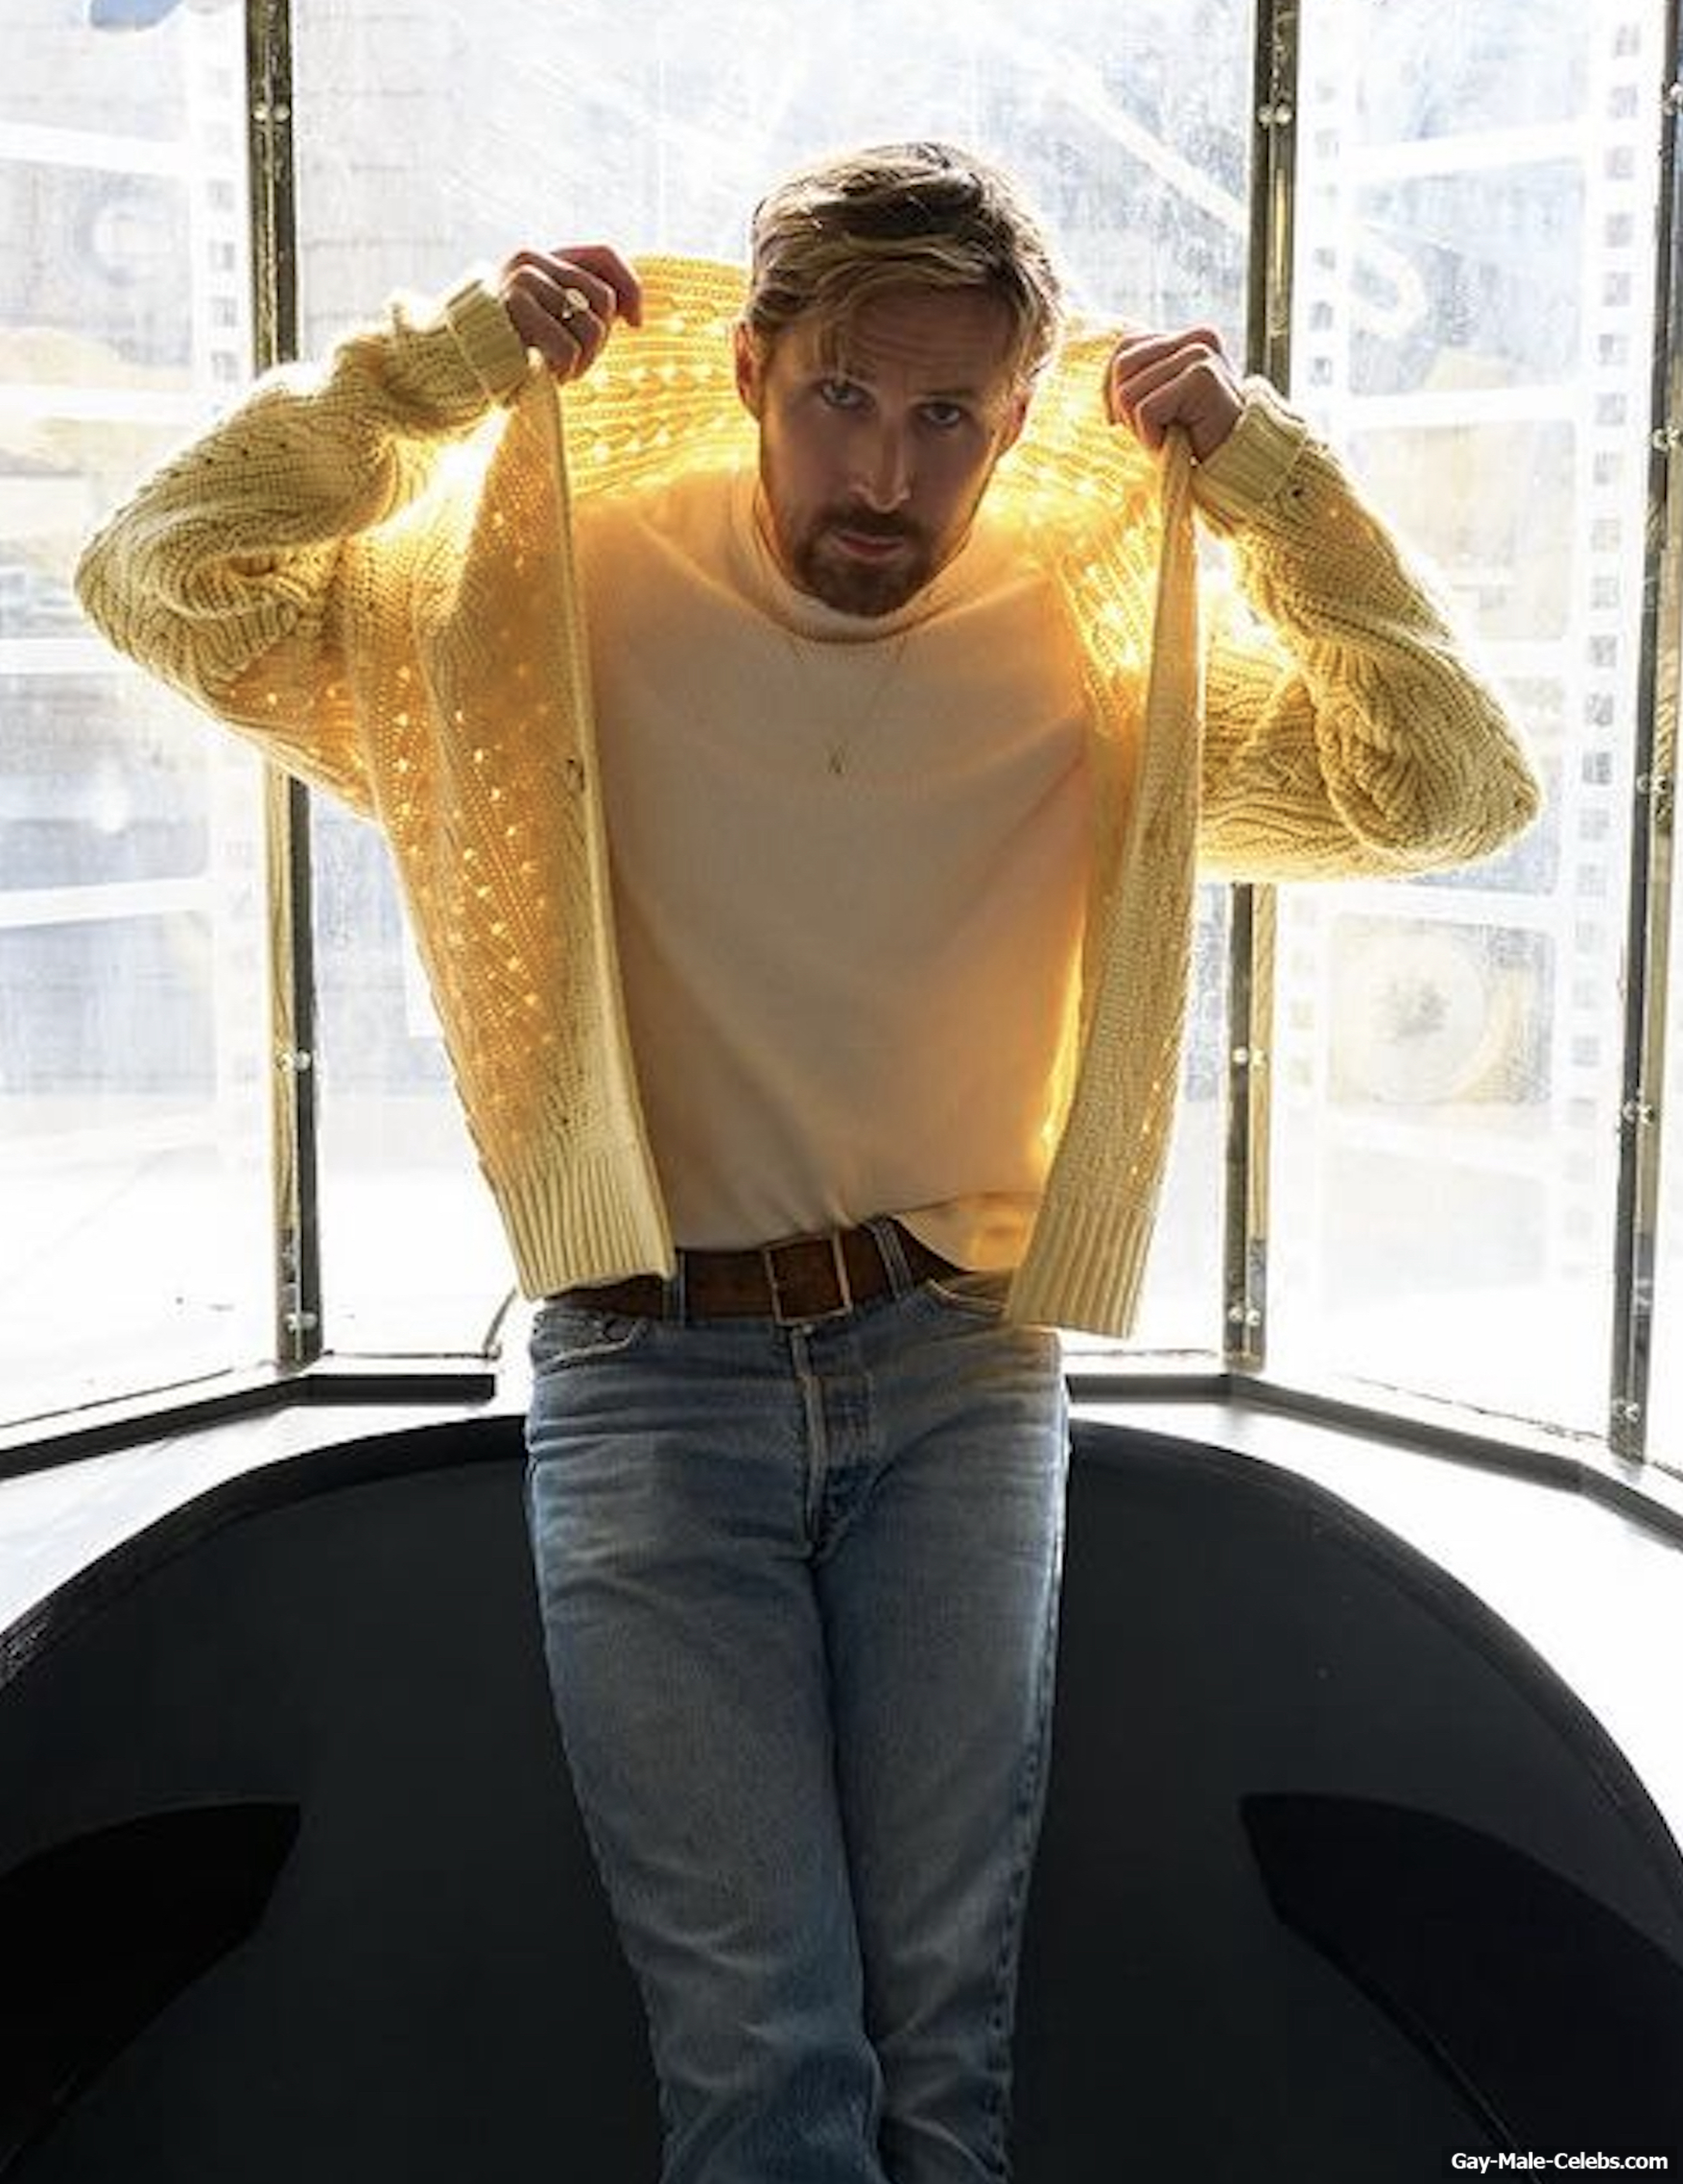 Ryan Gosling Looks Sexy in Tight Jeans